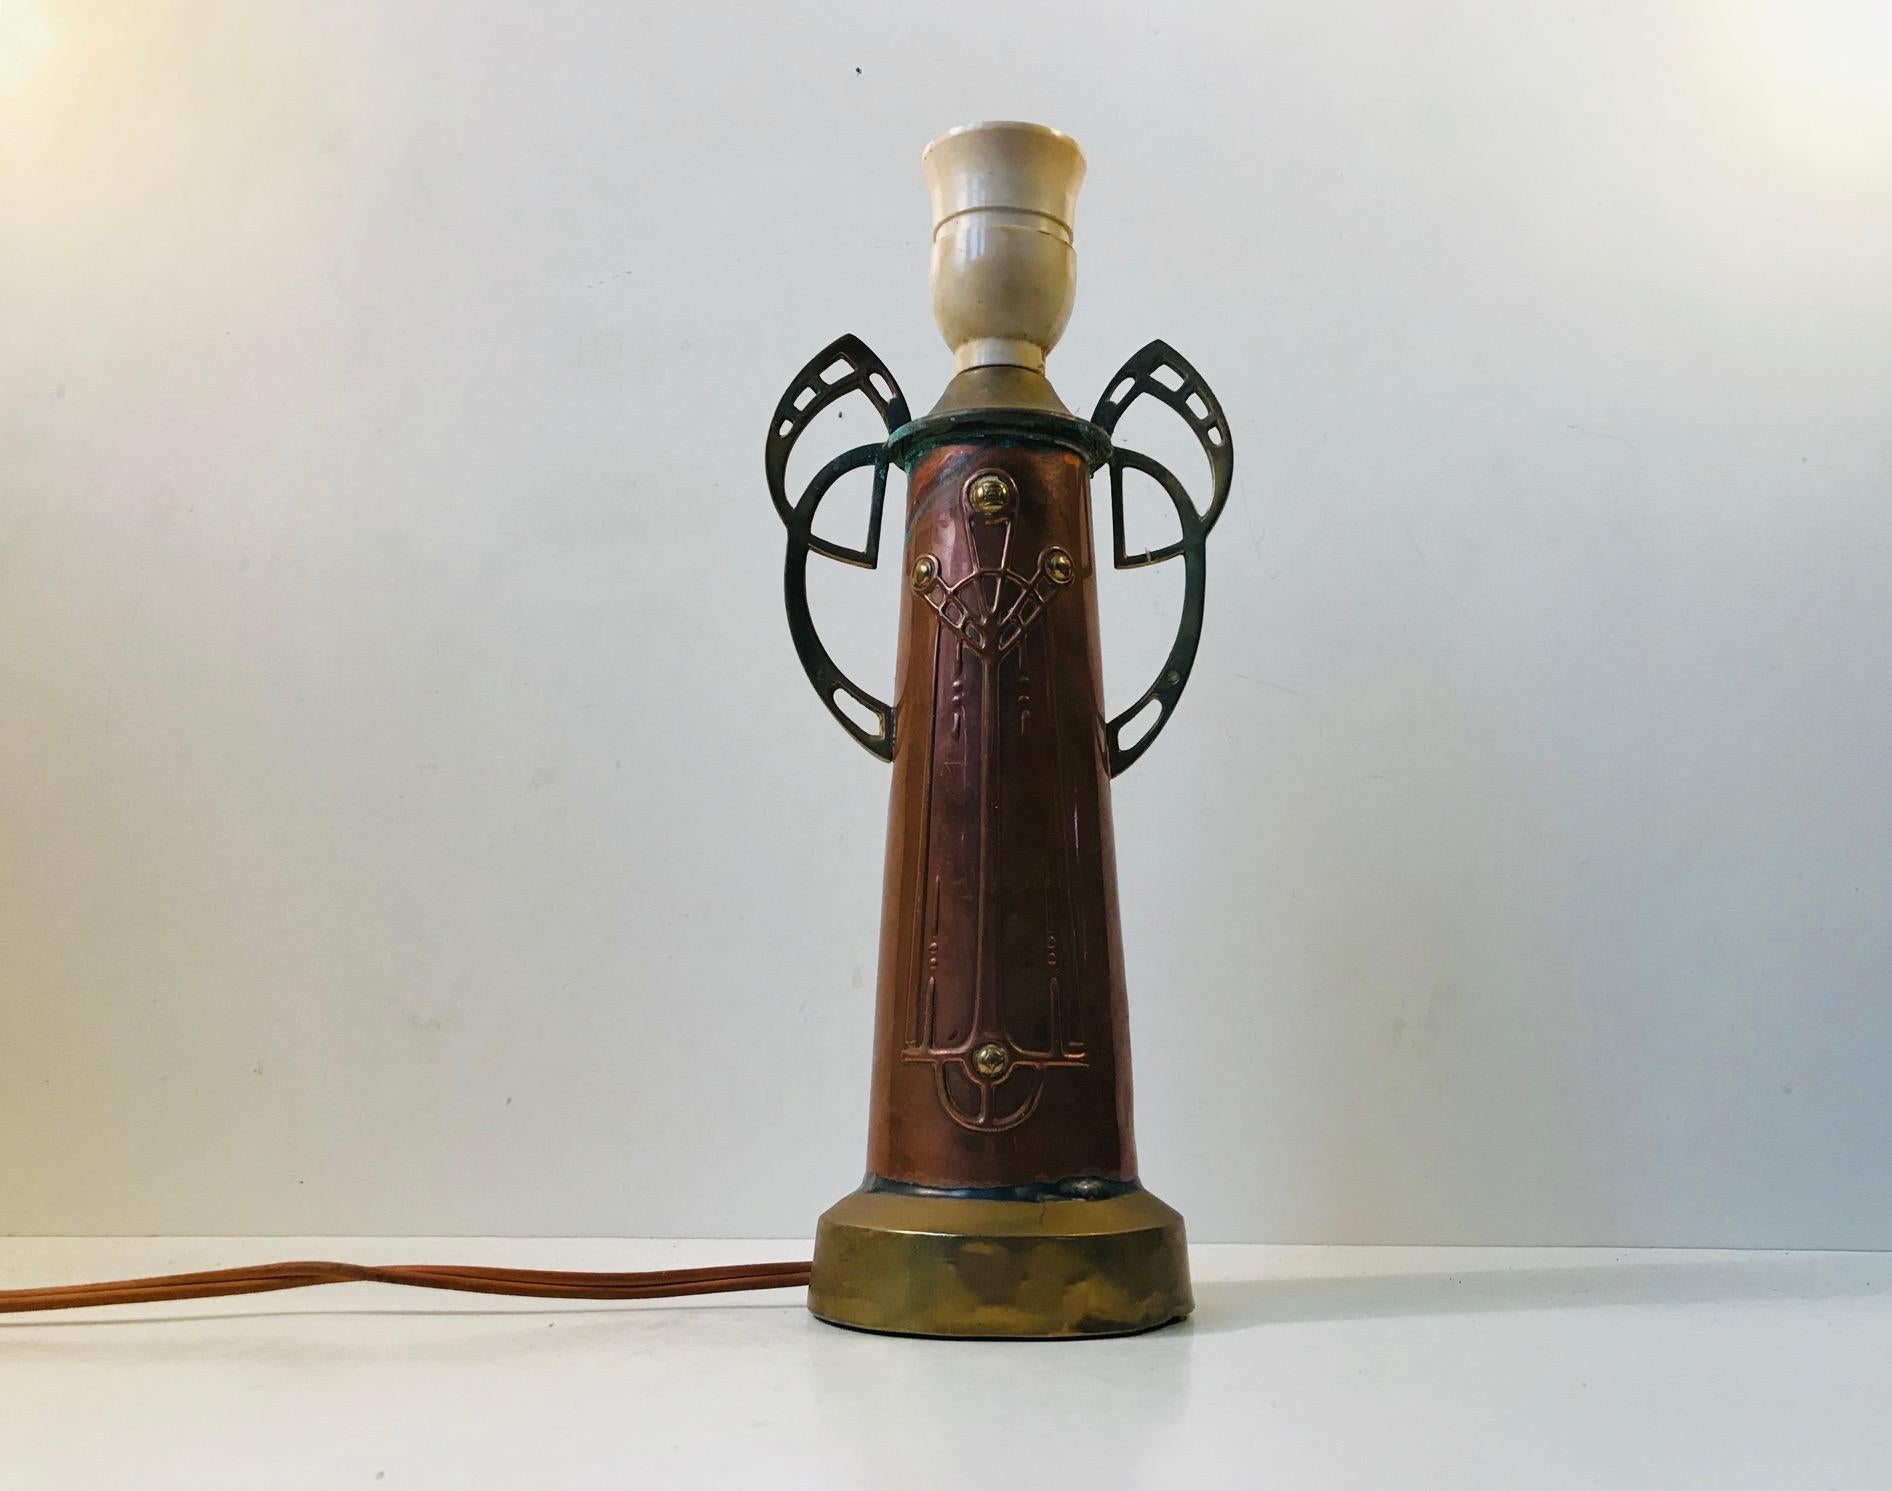 Characteristic Jugendstil table light in patinated unpolished copper and brass. It signed/inscribed to the base by an unidentified maker. Probably made in Germany during the 1910s in a style reminiscent of WMF. Please personalize with your own